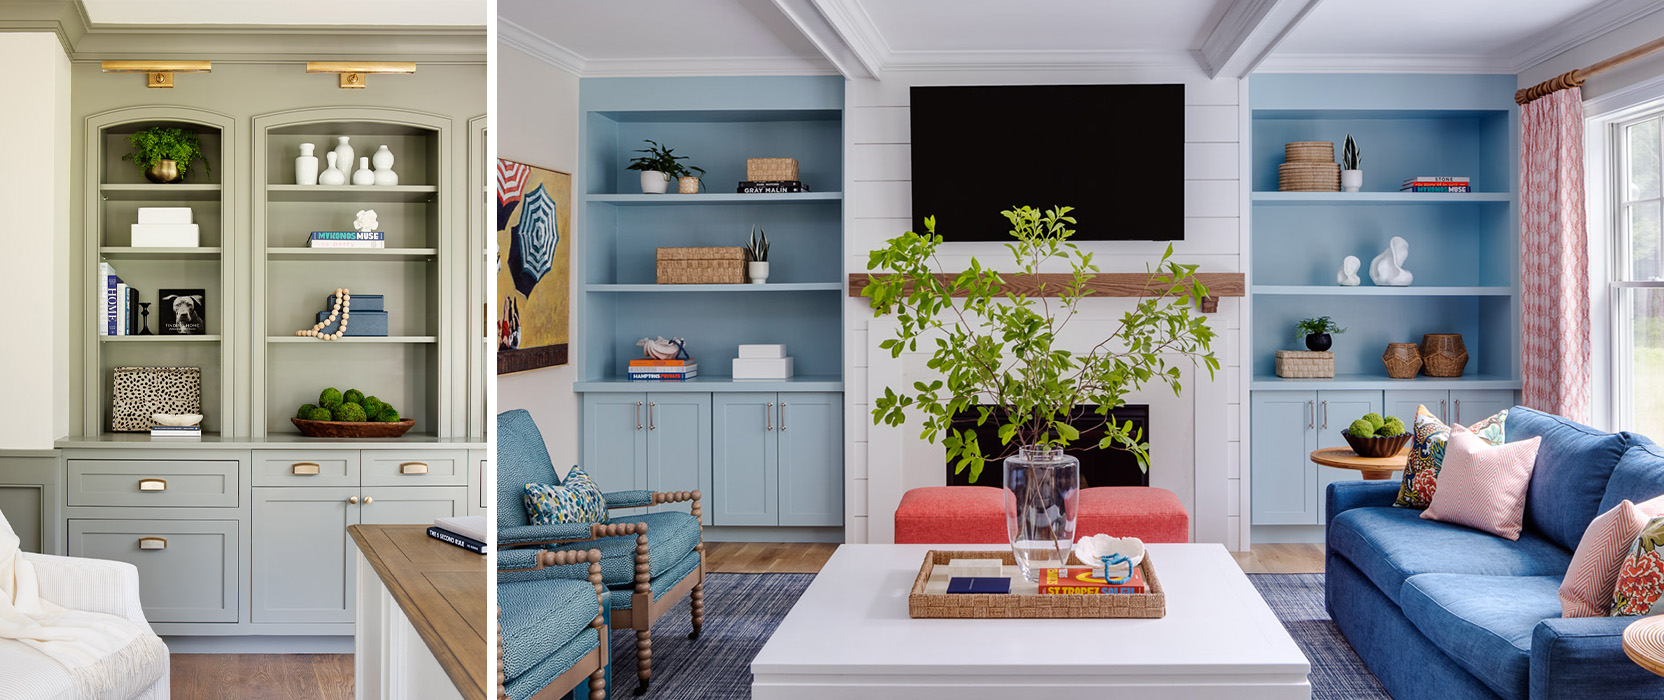 Left image: Built-in bookshelves and cabinets in living room with styled accessories and metallic brass hardware and gallery lighting. Right image: Living room with decor and furnishings in shades of blue and pink, large square white coffee table in front of fireplace and TV flanked by light blue painted built-ins.